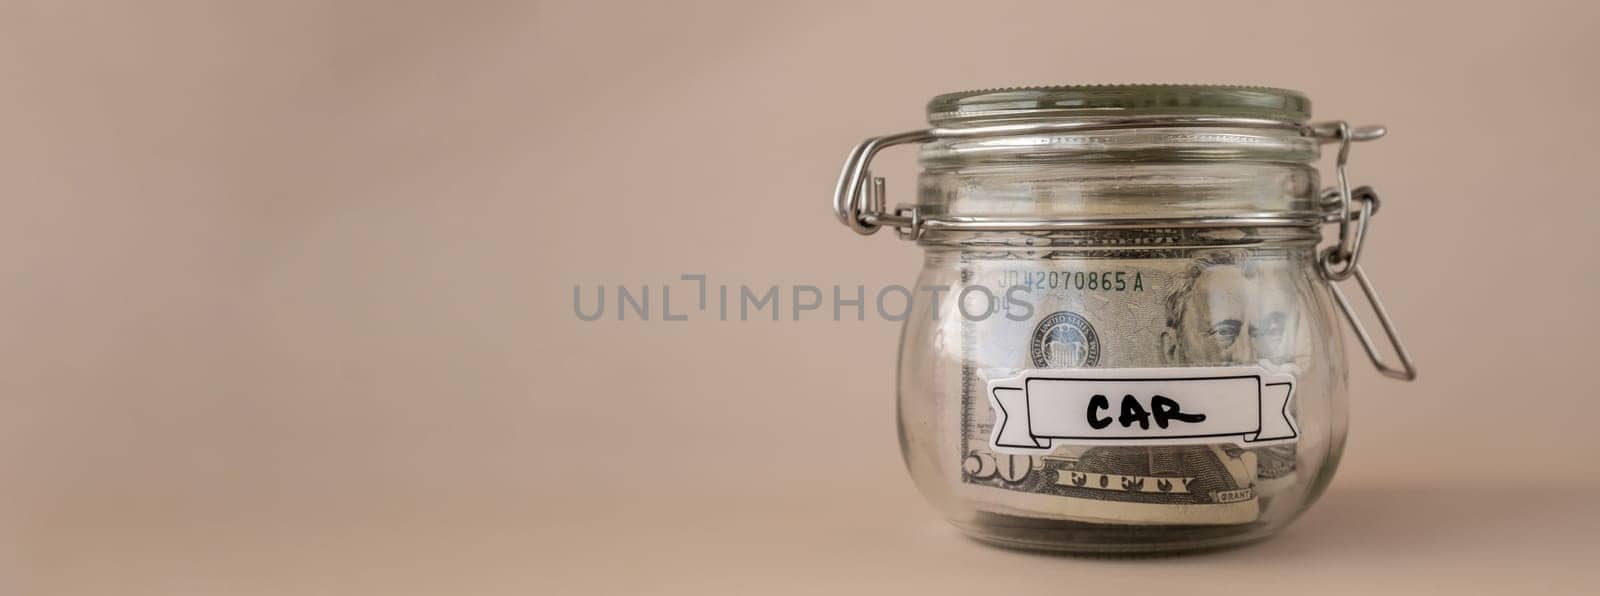 Saving Money In Glass Jar filled with Dollars banknotes. CAR transcription in front of jar. Managing personal finances extra income for future insecurity by anna_stasiia